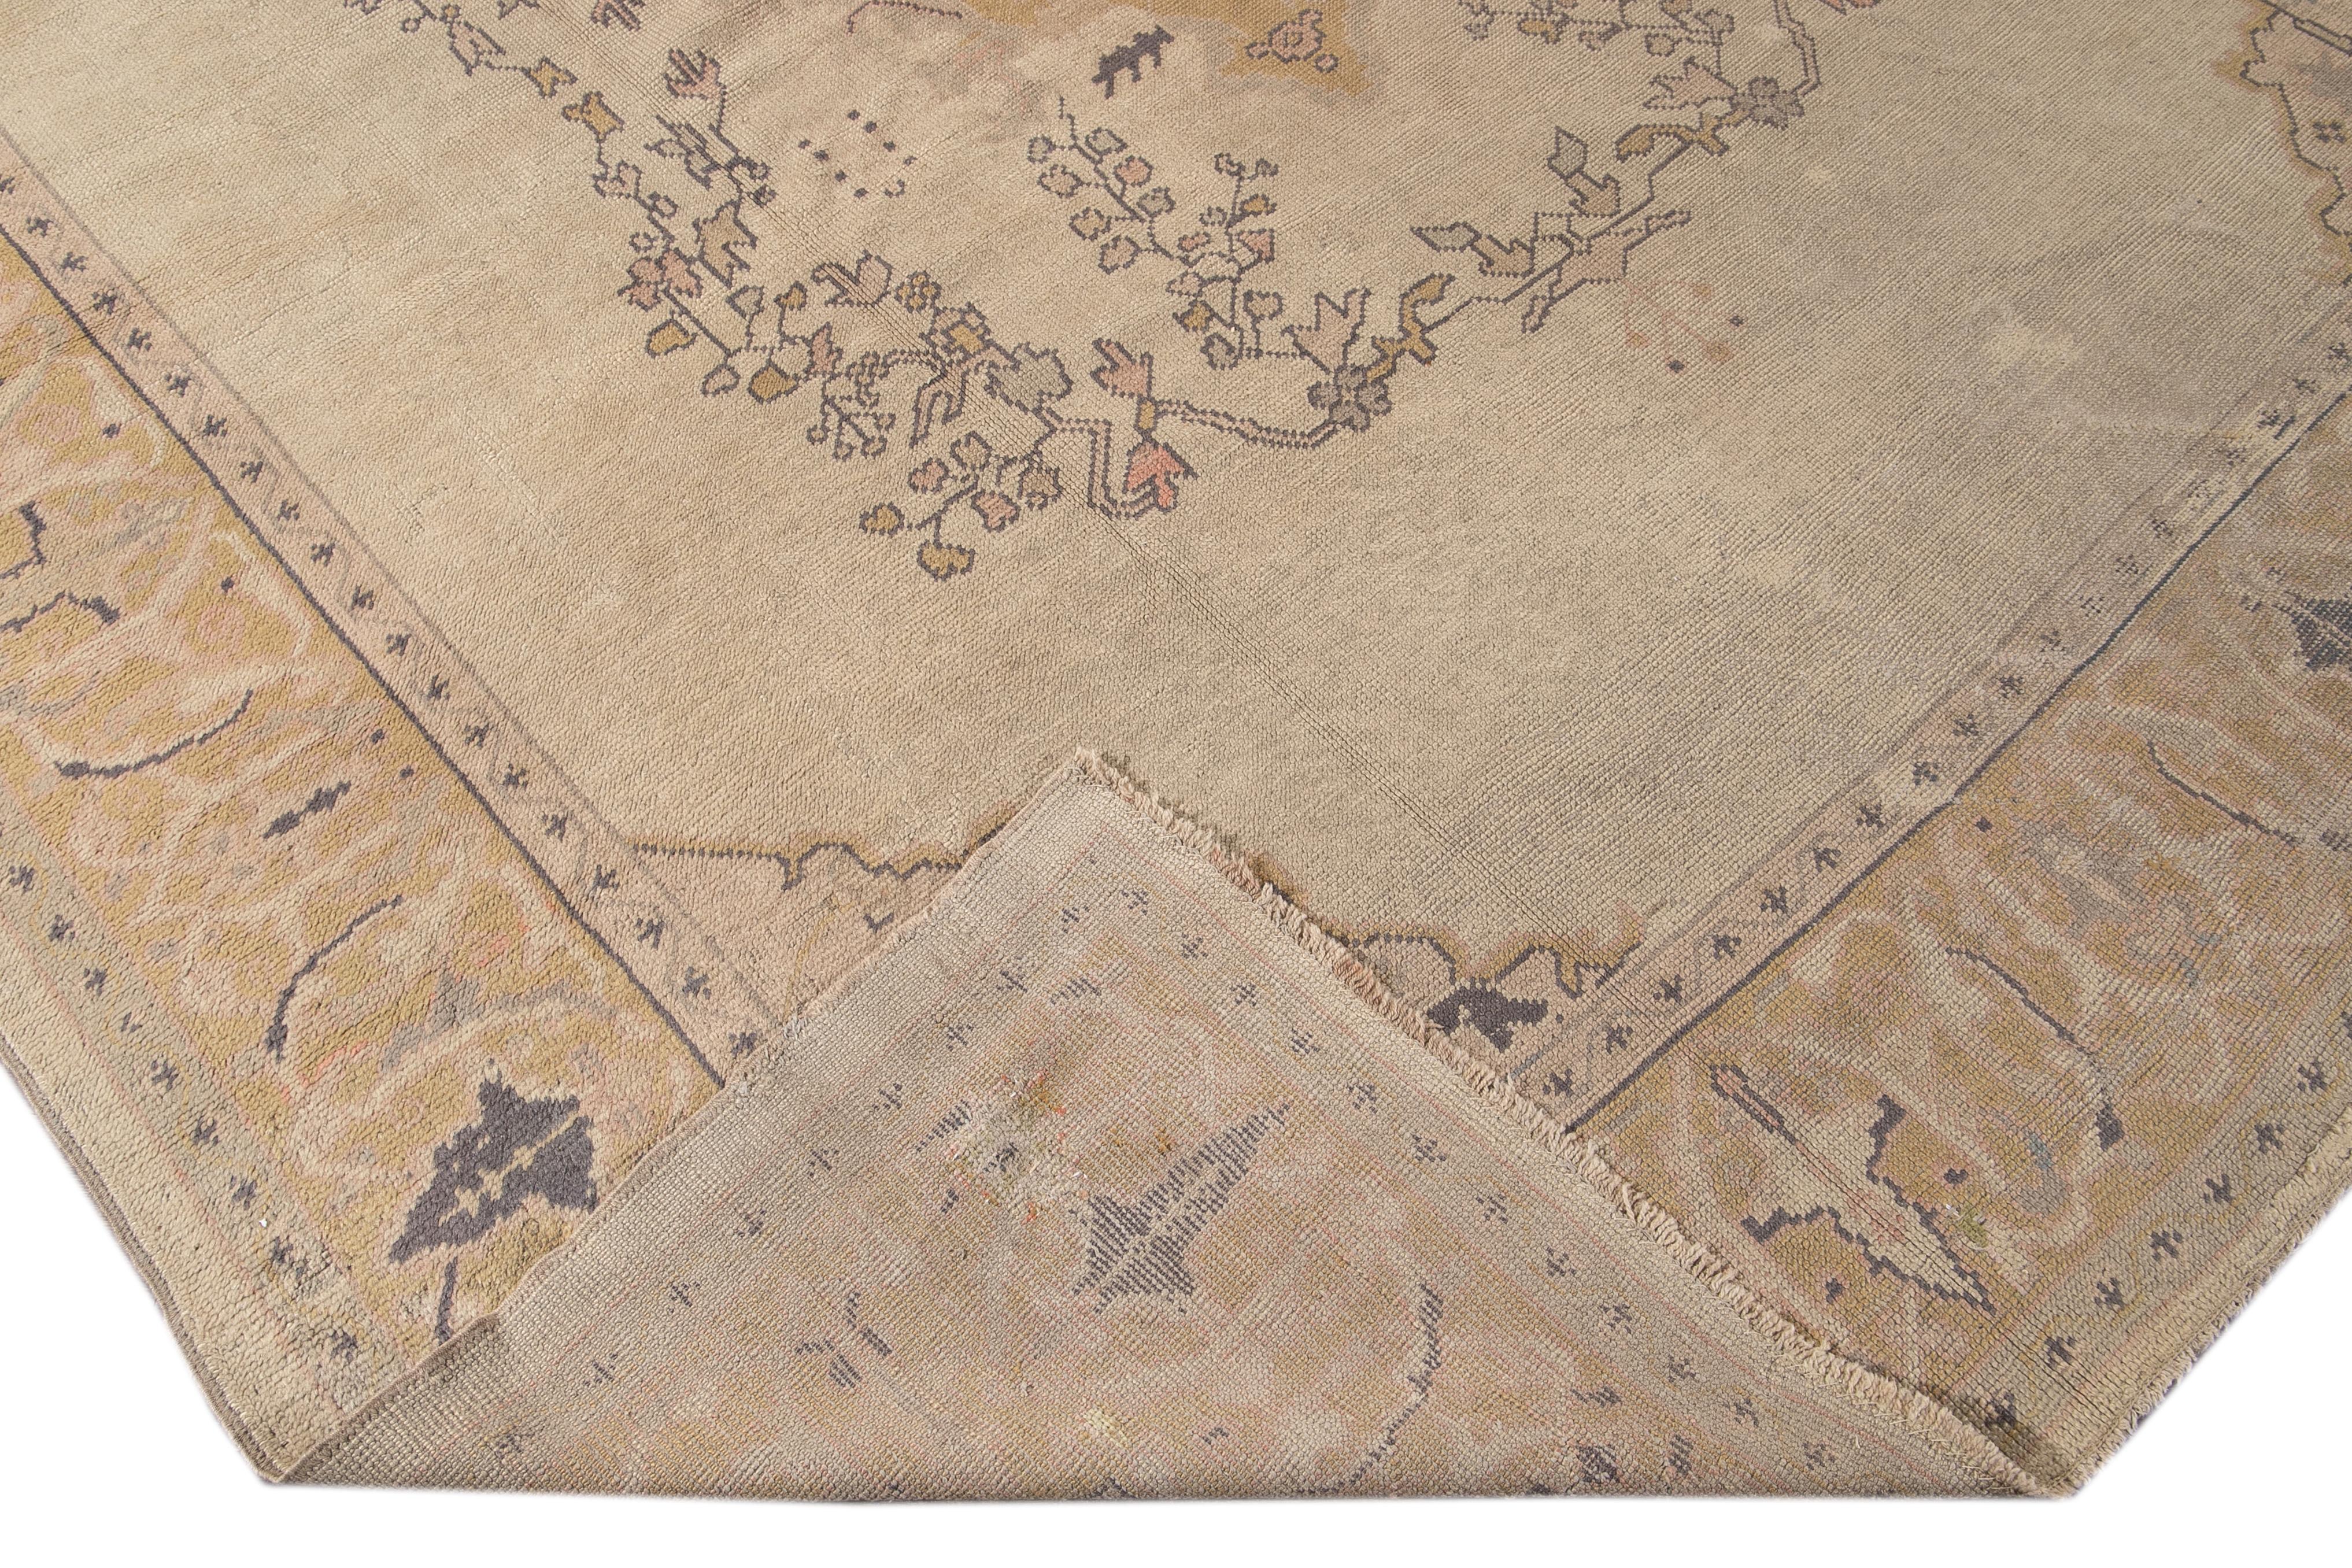 Beautiful antique Turkish Oushak hand knotted wool rug with the beige field. This Oushak rug has a goldenrod frame peach, pink, and yellow accents in a gorgeous all-over center medallion floral design.

This rug measures: 10'2